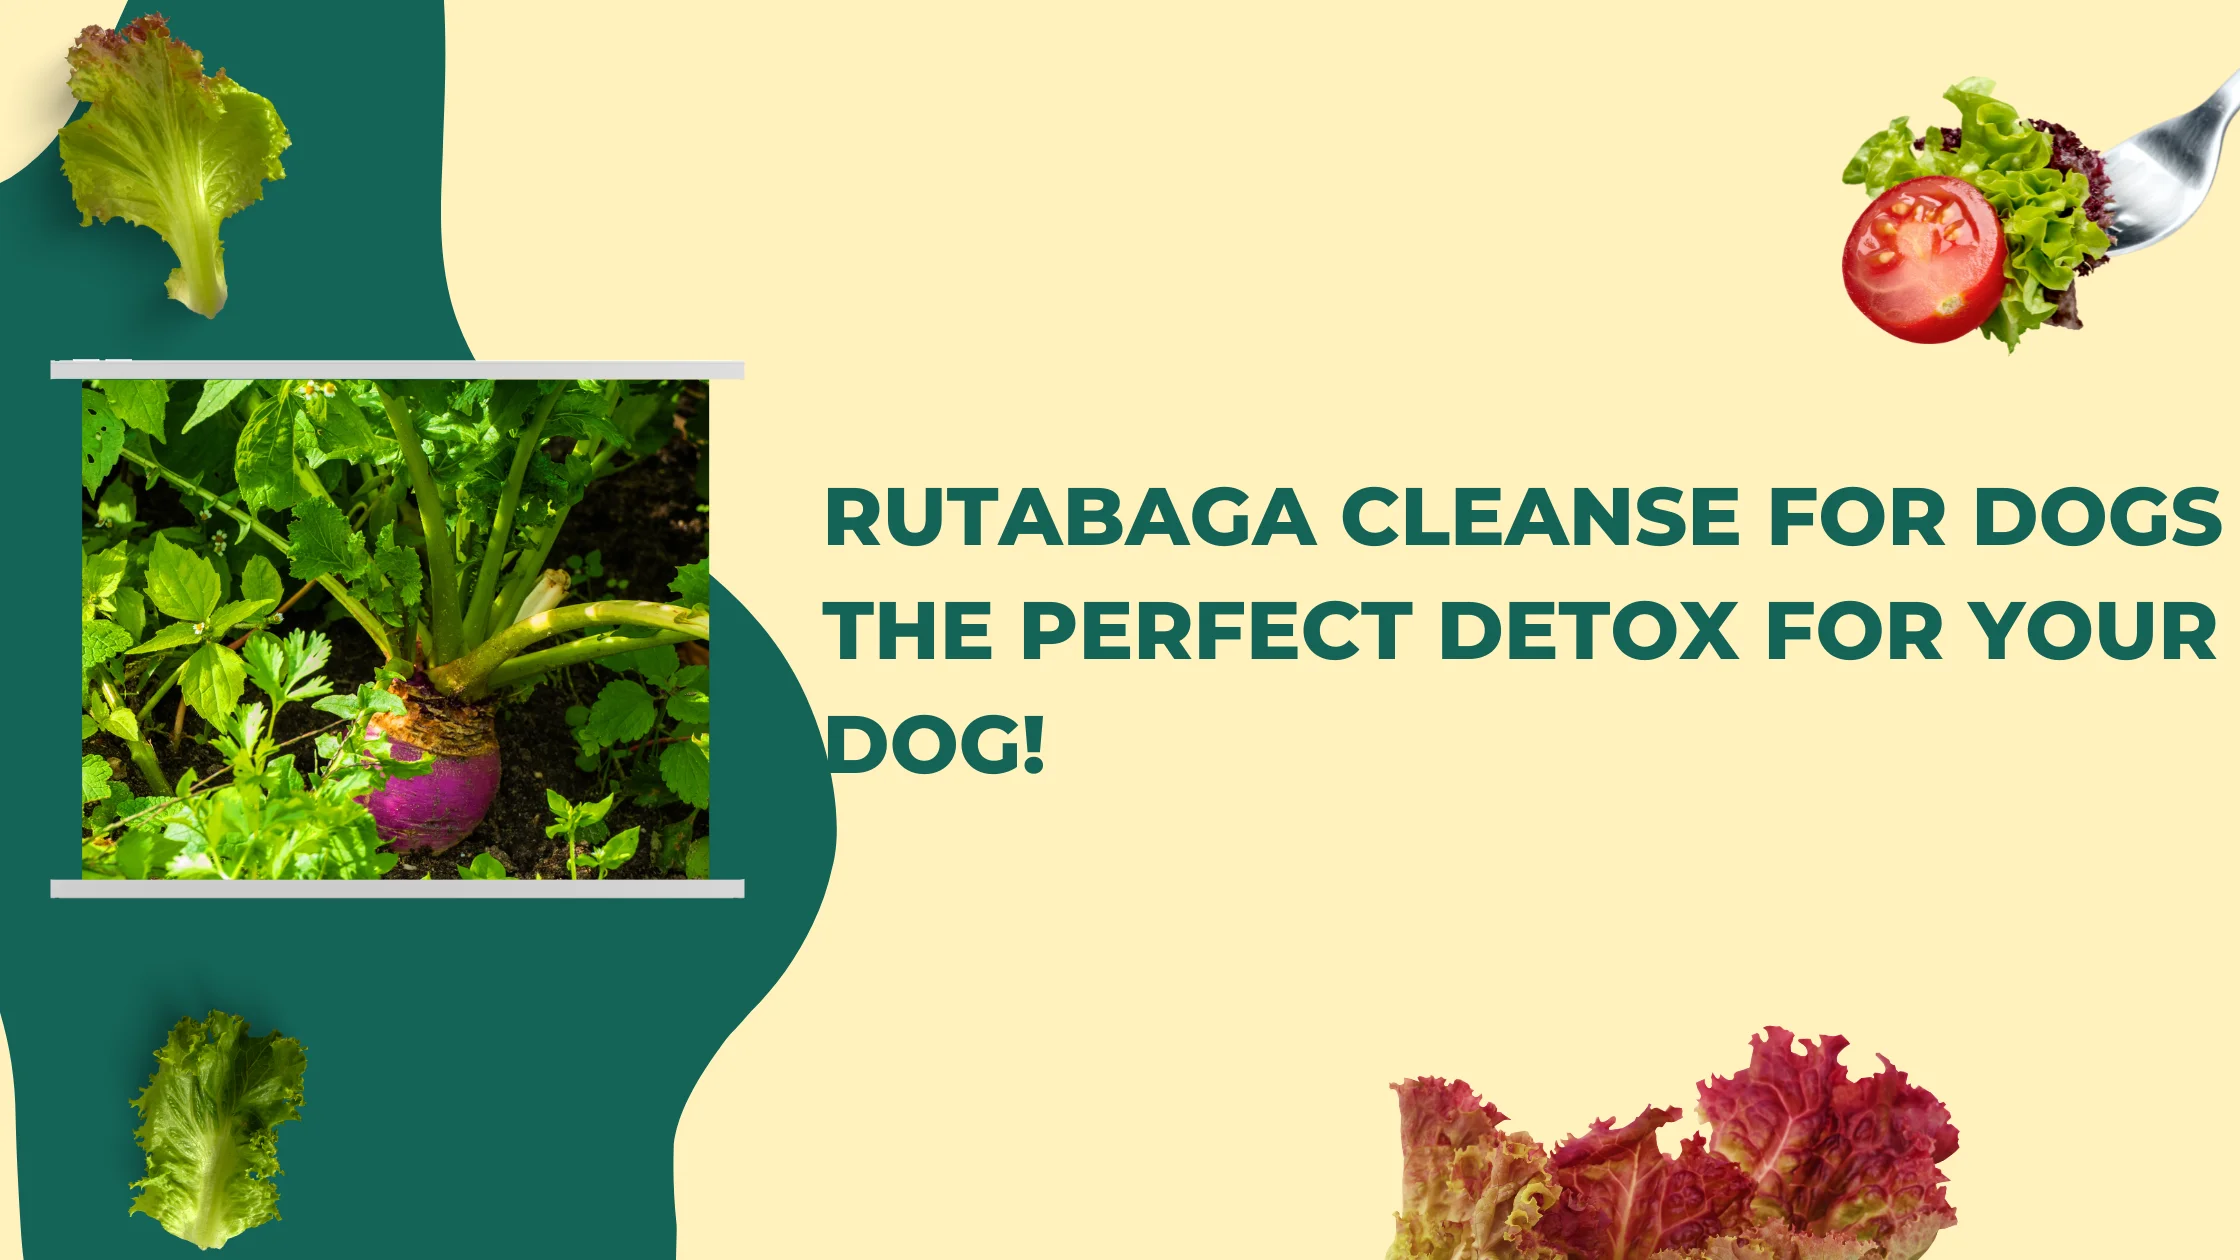 Rutabaga Cleanse for Dogs